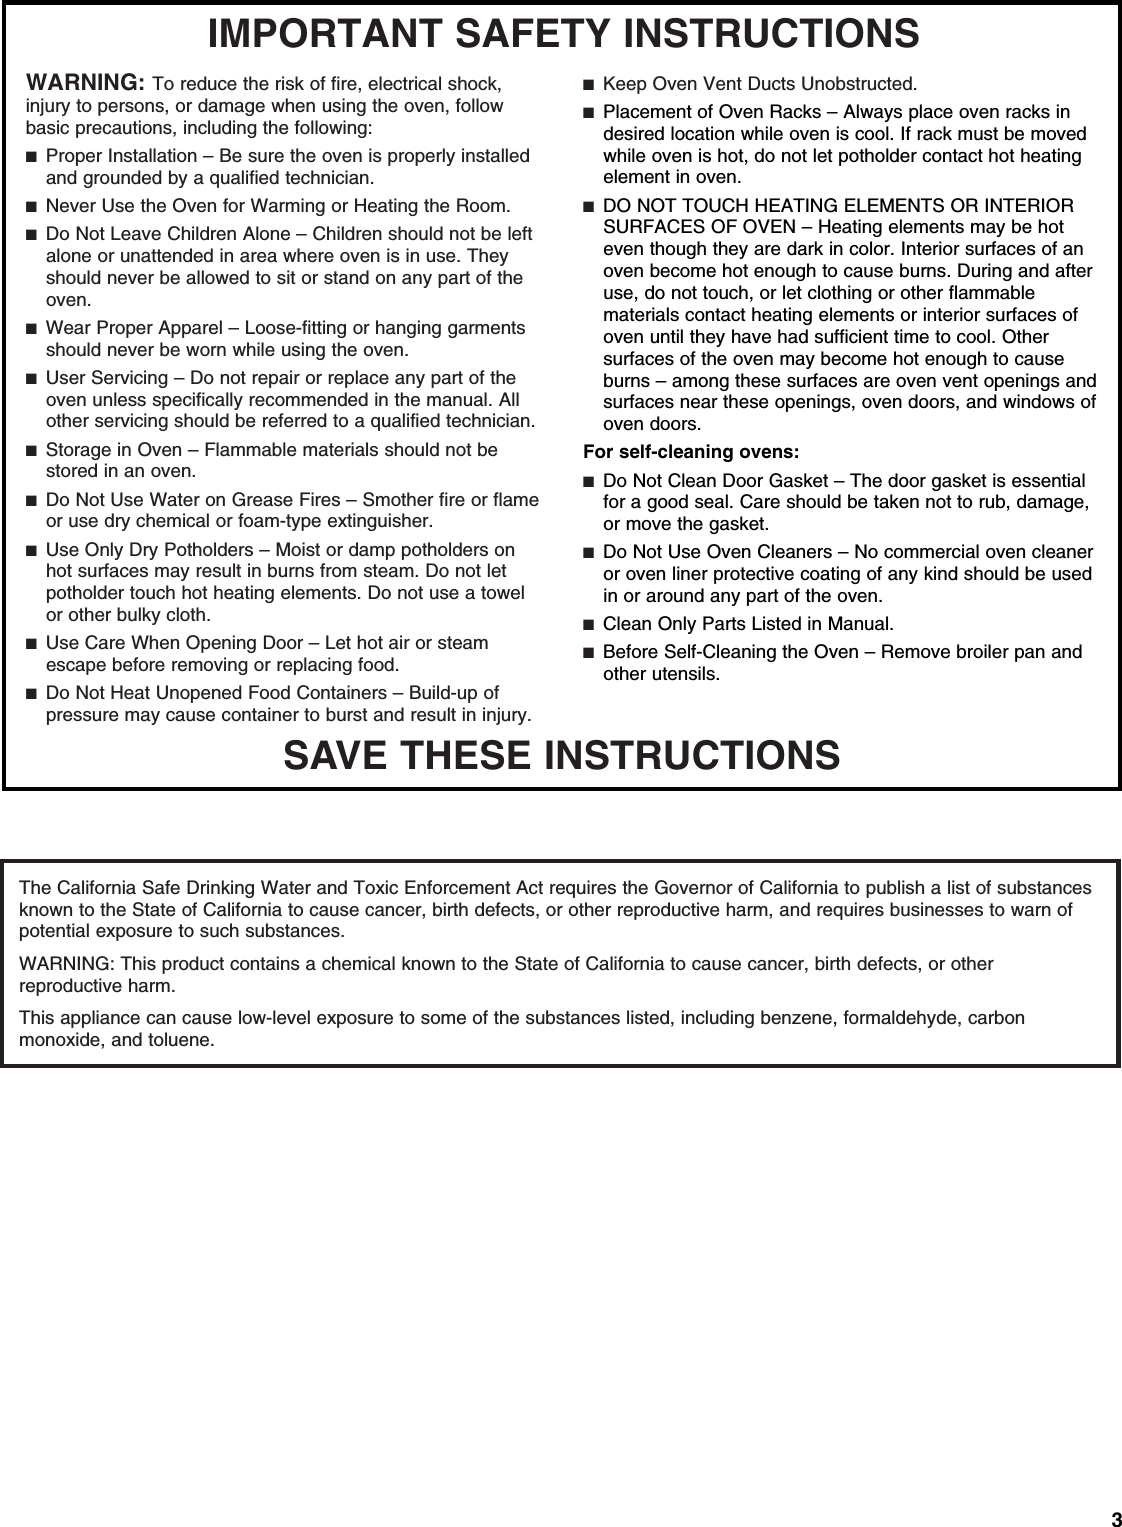 3SAVE THESE INSTRUCTIONSIMPORTANT SAFETY INSTRUCTIONSWARNING: To reduce the risk of fire, electrical shock, injury to persons, or damage when using the oven, follow basic precautions, including the following:■  Proper Installation – Be sure the oven is properly installed and grounded by a qualified technician.■  Never Use the Oven for Warming or Heating the Room.■  Do Not Leave Children Alone – Children should not be left alone or unattended in area where oven is in use. They should never be allowed to sit or stand on any part of the oven.■  Wear Proper Apparel – Loose-fitting or hanging garments should never be worn while using the oven.■  User Servicing – Do not repair or replace any part of the oven unless specifically recommended in the manual. All other servicing should be referred to a qualified technician.■  Storage in Oven – Flammable materials should not be stored in an oven.■  Do Not Use Water on Grease Fires – Smother fire or flame or use dry chemical or foam-type extinguisher.■  Use Only Dry Potholders – Moist or damp potholders on hot surfaces may result in burns from steam. Do not let potholder touch hot heating elements. Do not use a towel or other bulky cloth. ■  Use Care When Opening Door – Let hot air or steam escape before removing or replacing food.■  Do Not Heat Unopened Food Containers – Build-up of pressure may cause container to burst and result in injury.■  Keep Oven Vent Ducts Unobstructed.■  Placement of Oven Racks – Always place oven racks in desired location while oven is cool. If rack must be moved while oven is hot, do not let potholder contact hot heating element in oven.■  DO NOT TOUCH HEATING ELEMENTS OR INTERIOR SURFACES OF OVEN – Heating elements may be hot even though they are dark in color. Interior surfaces of an oven become hot enough to cause burns. During and after use, do not touch, or let clothing or other flammable materials contact heating elements or interior surfaces of oven until they have had sufficient time to cool. Other surfaces of the oven may become hot enough to cause burns – among these surfaces are oven vent openings and surfaces near these openings, oven doors, and windows of oven doors.For self-cleaning ovens:■  Do Not Clean Door Gasket – The door gasket is essential for a good seal. Care should be taken not to rub, damage, or move the gasket.■  Do Not Use Oven Cleaners – No commercial oven cleaner or oven liner protective coating of any kind should be used in or around any part of the oven. ■  Clean Only Parts Listed in Manual.■  Before Self-Cleaning the Oven – Remove broiler pan and other utensils. The California Safe Drinking Water and Toxic Enforcement Act requires the Governor of California to publish a list of substances known to the State of California to cause cancer, birth defects, or other reproductive harm, and requires businesses to warn of potential exposure to such substances.WARNING: This product contains a chemical known to the State of California to cause cancer, birth defects, or other reproductive harm.This appliance can cause low-level exposure to some of the substances listed, including benzene, formaldehyde, carbon monoxide, and toluene.  